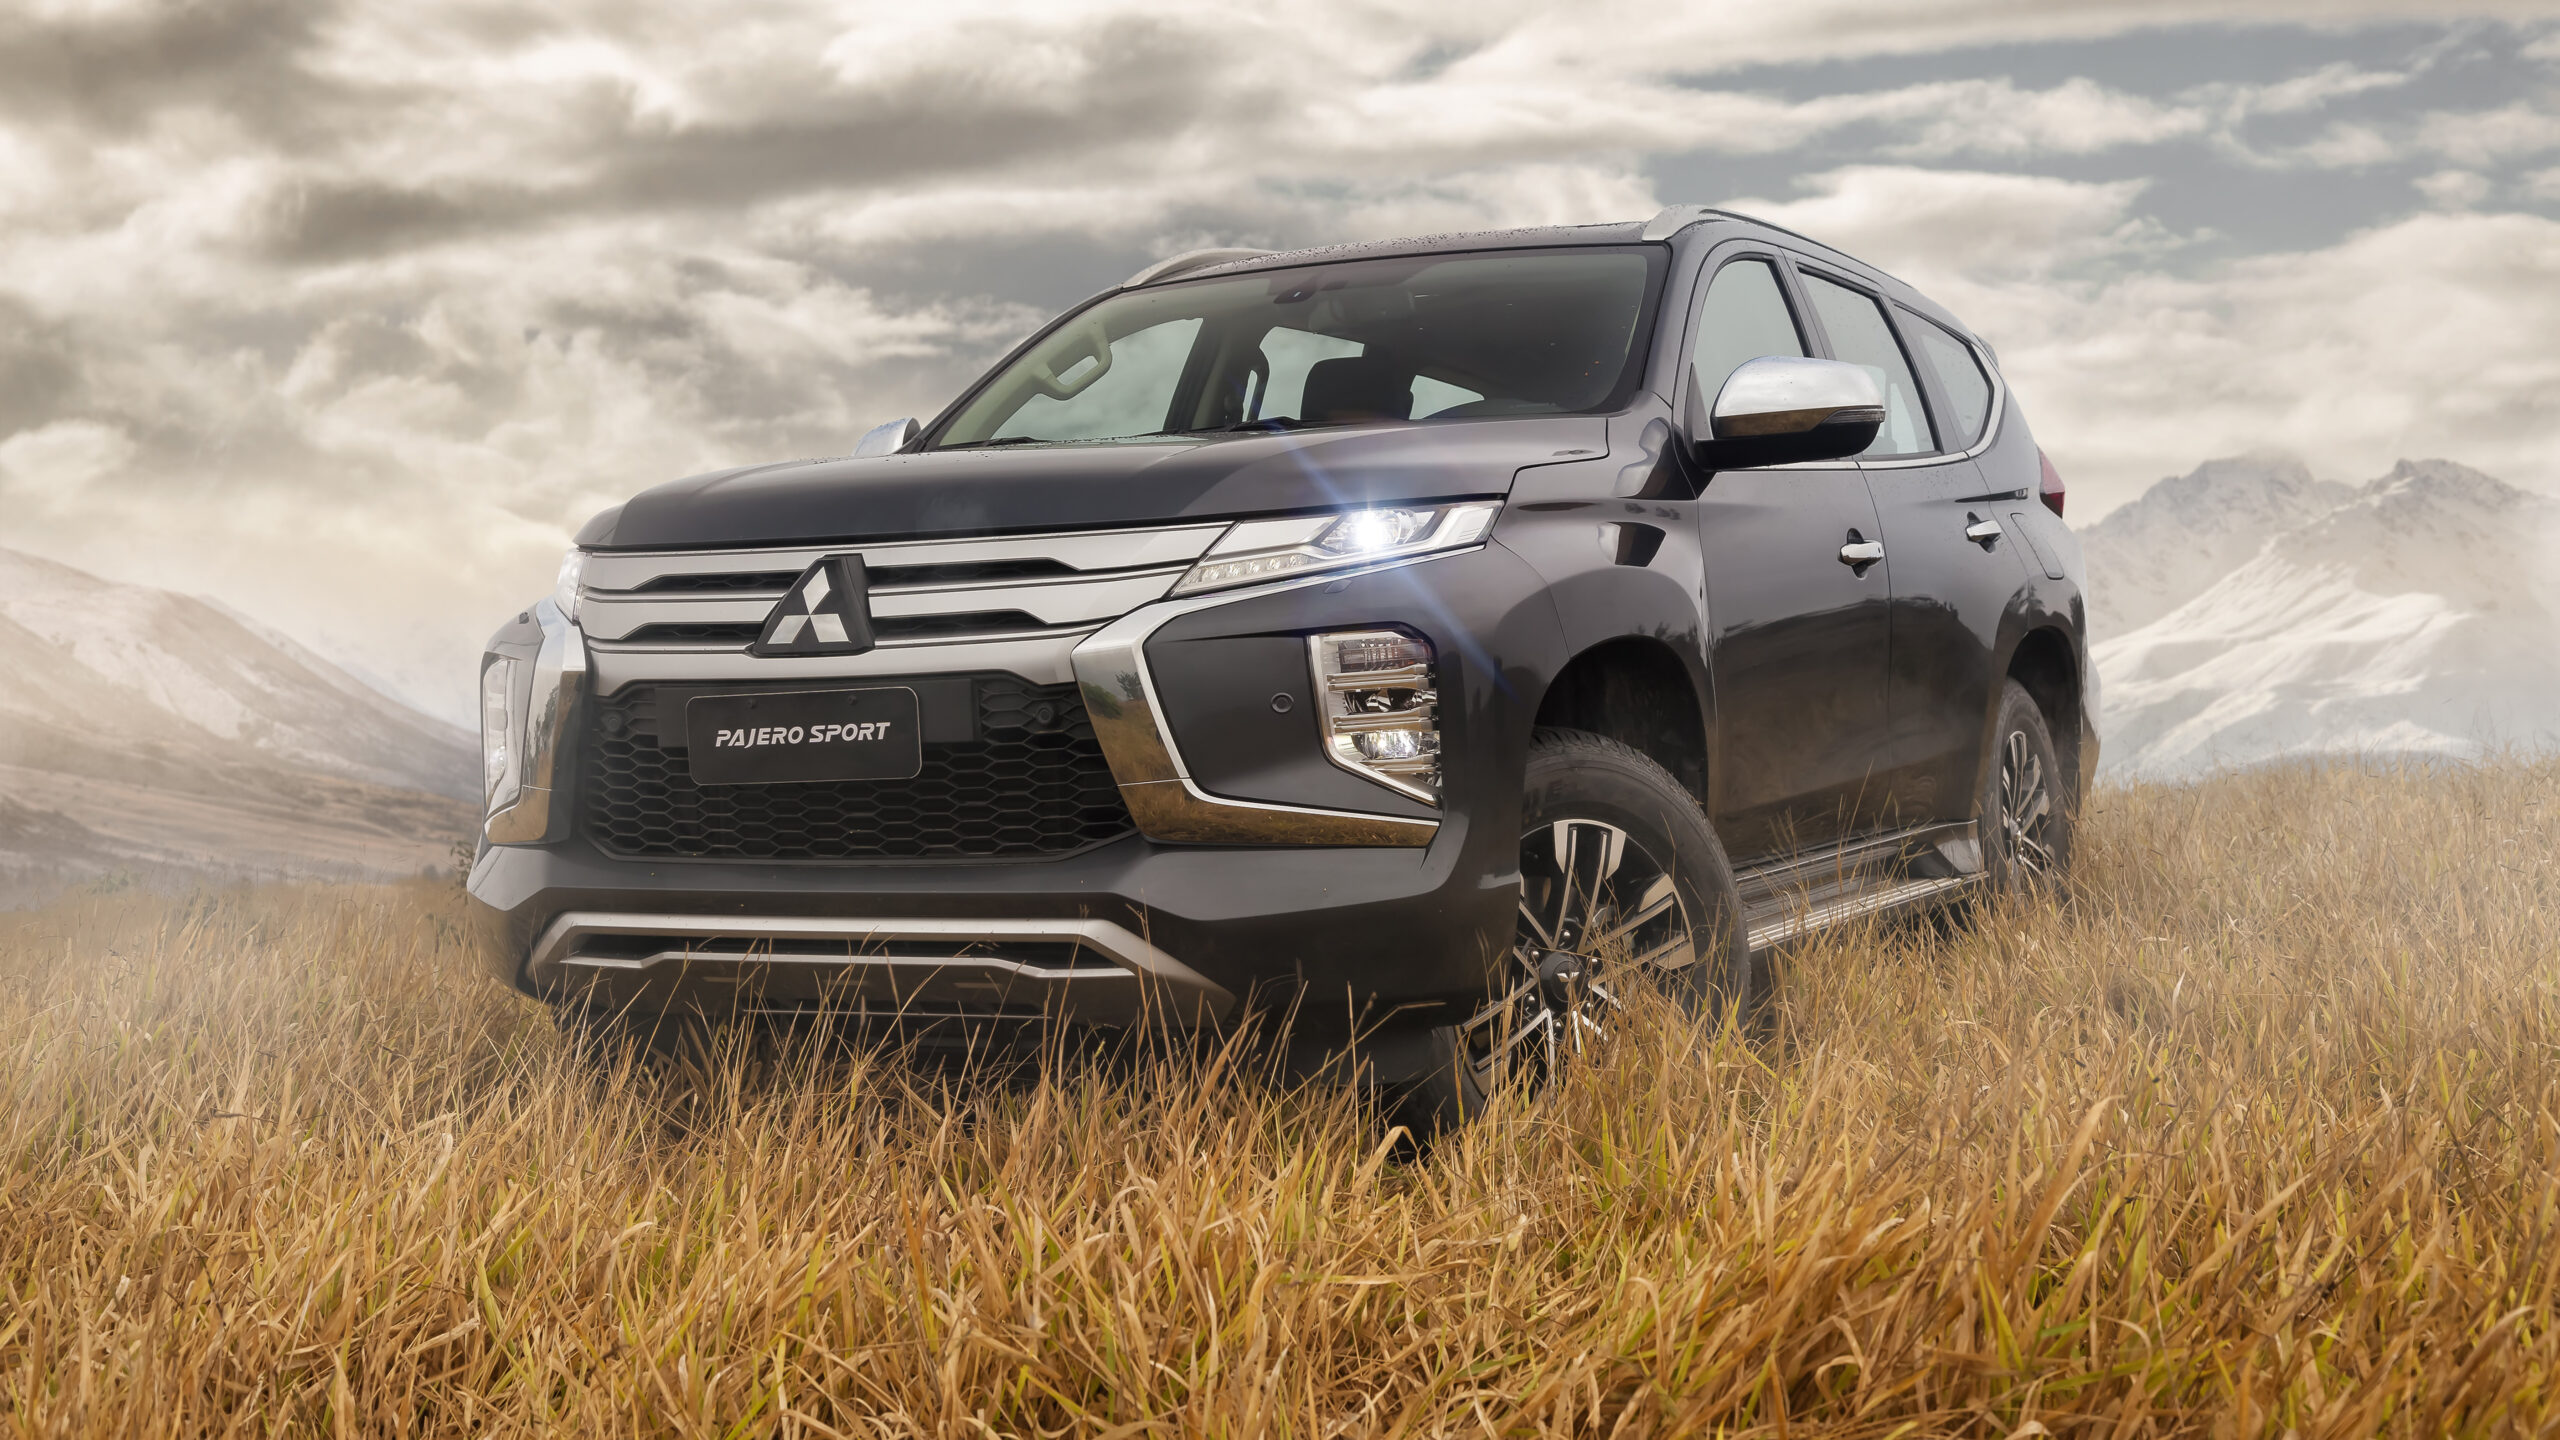 Title suggestion: “Exploring the Off-Road Capabilities of the Mitsubishi Pajero: A Review”